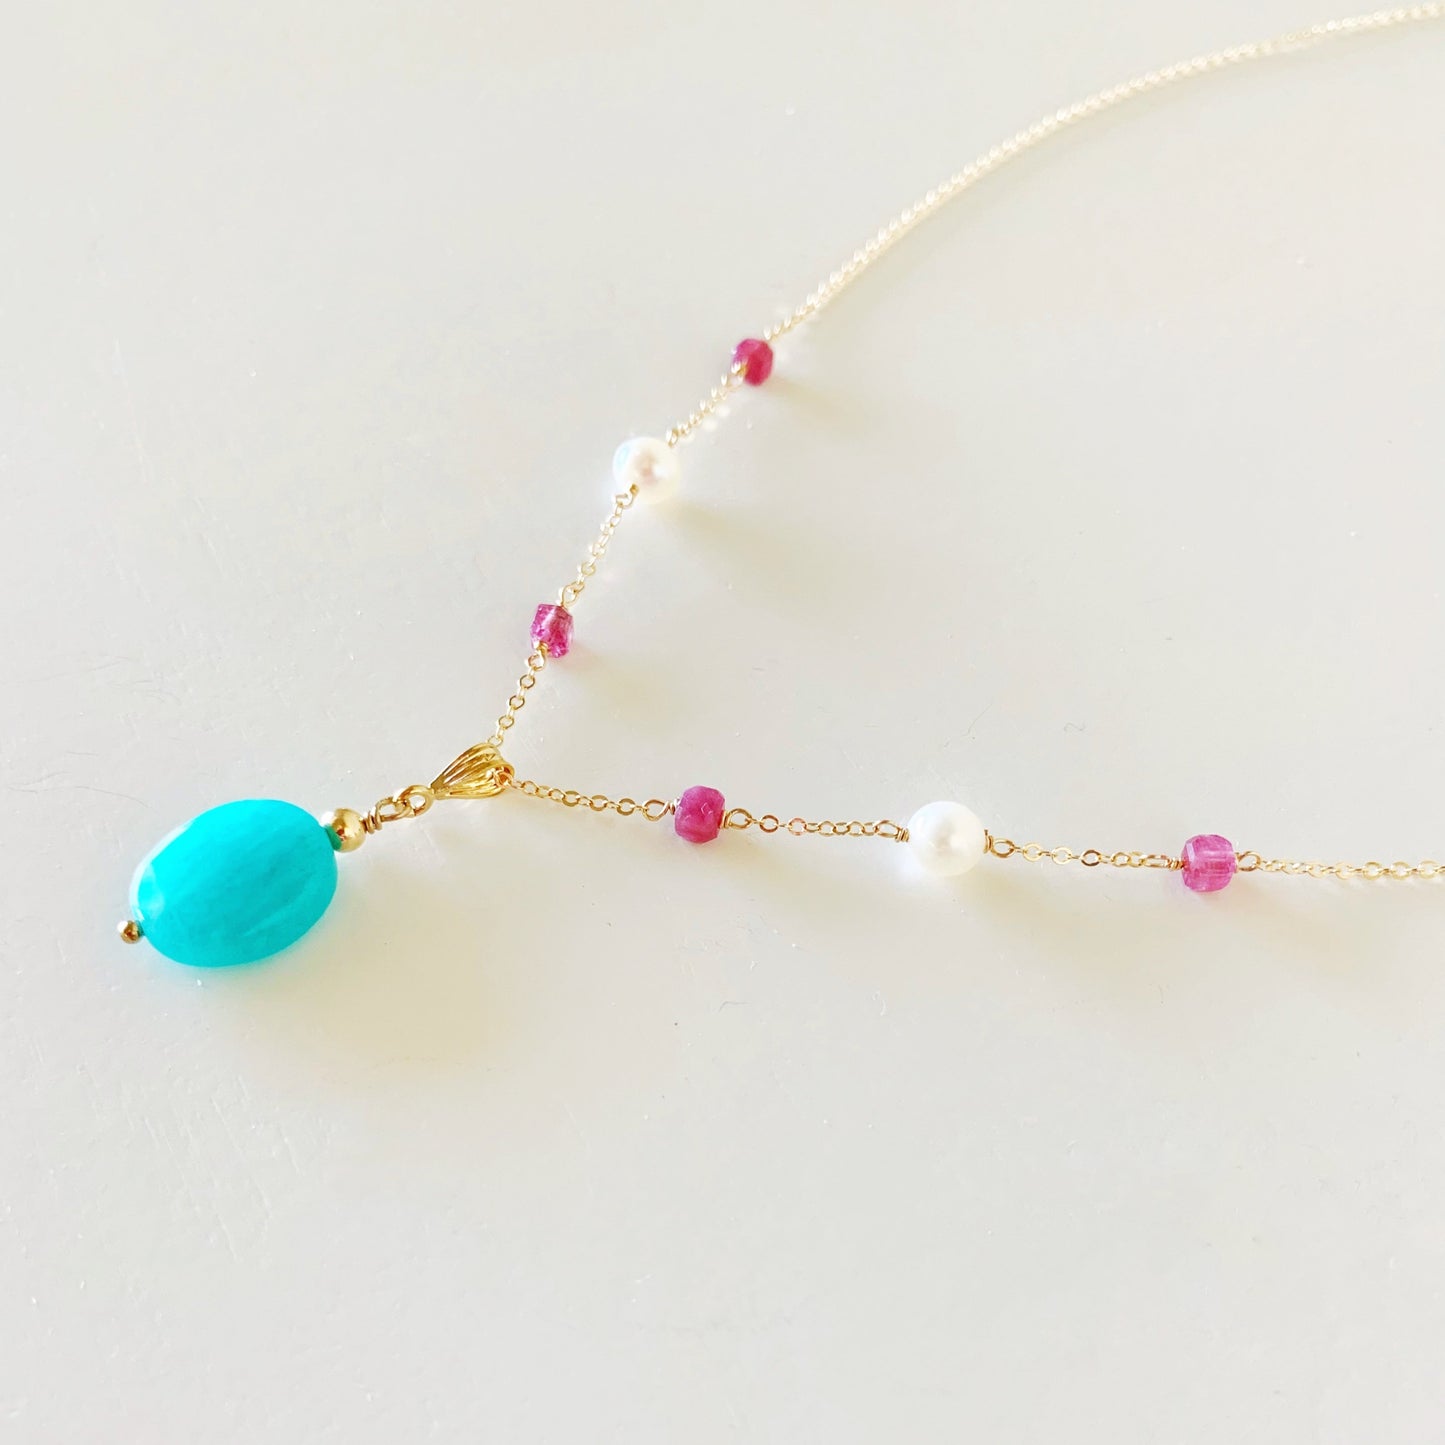 the harwich port by mermaids and madeleines is a pendant design with a bright amazonite stone suspended from 14k gold filled chain that has pink tourmaline and freshwater pearl on the chain. this necklace is facing to the left  and photographed on a white surface